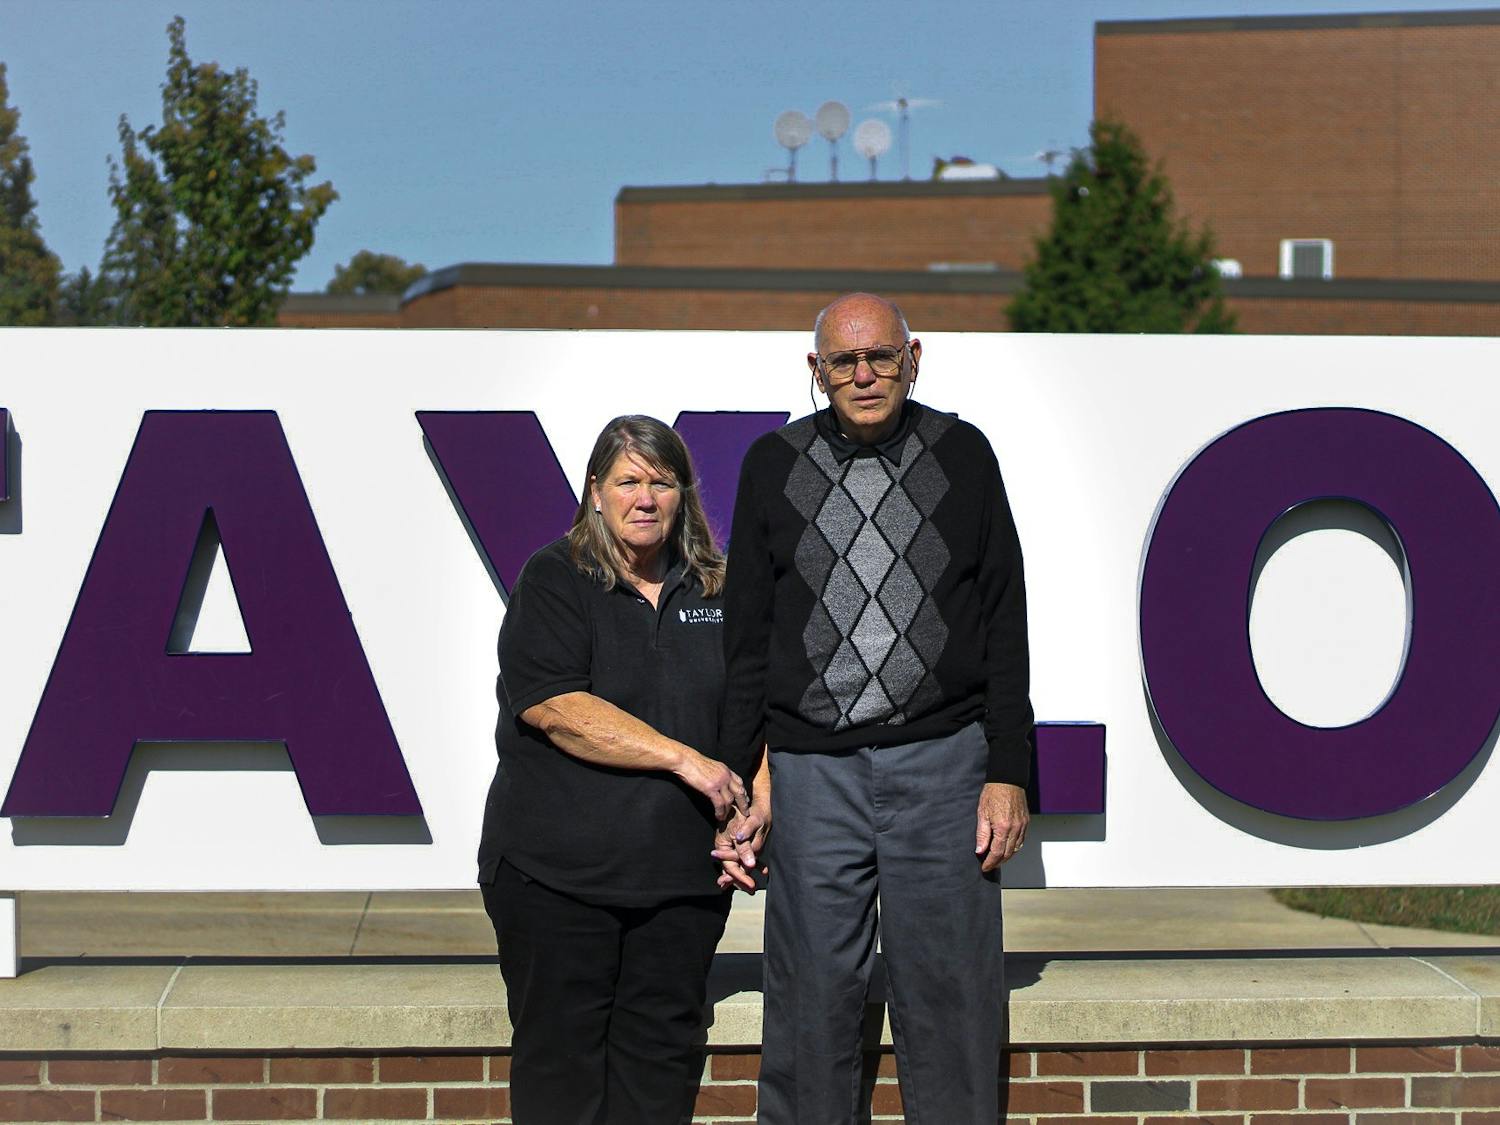 Ronald and Diana Brooks have been working at Taylor together for many years.